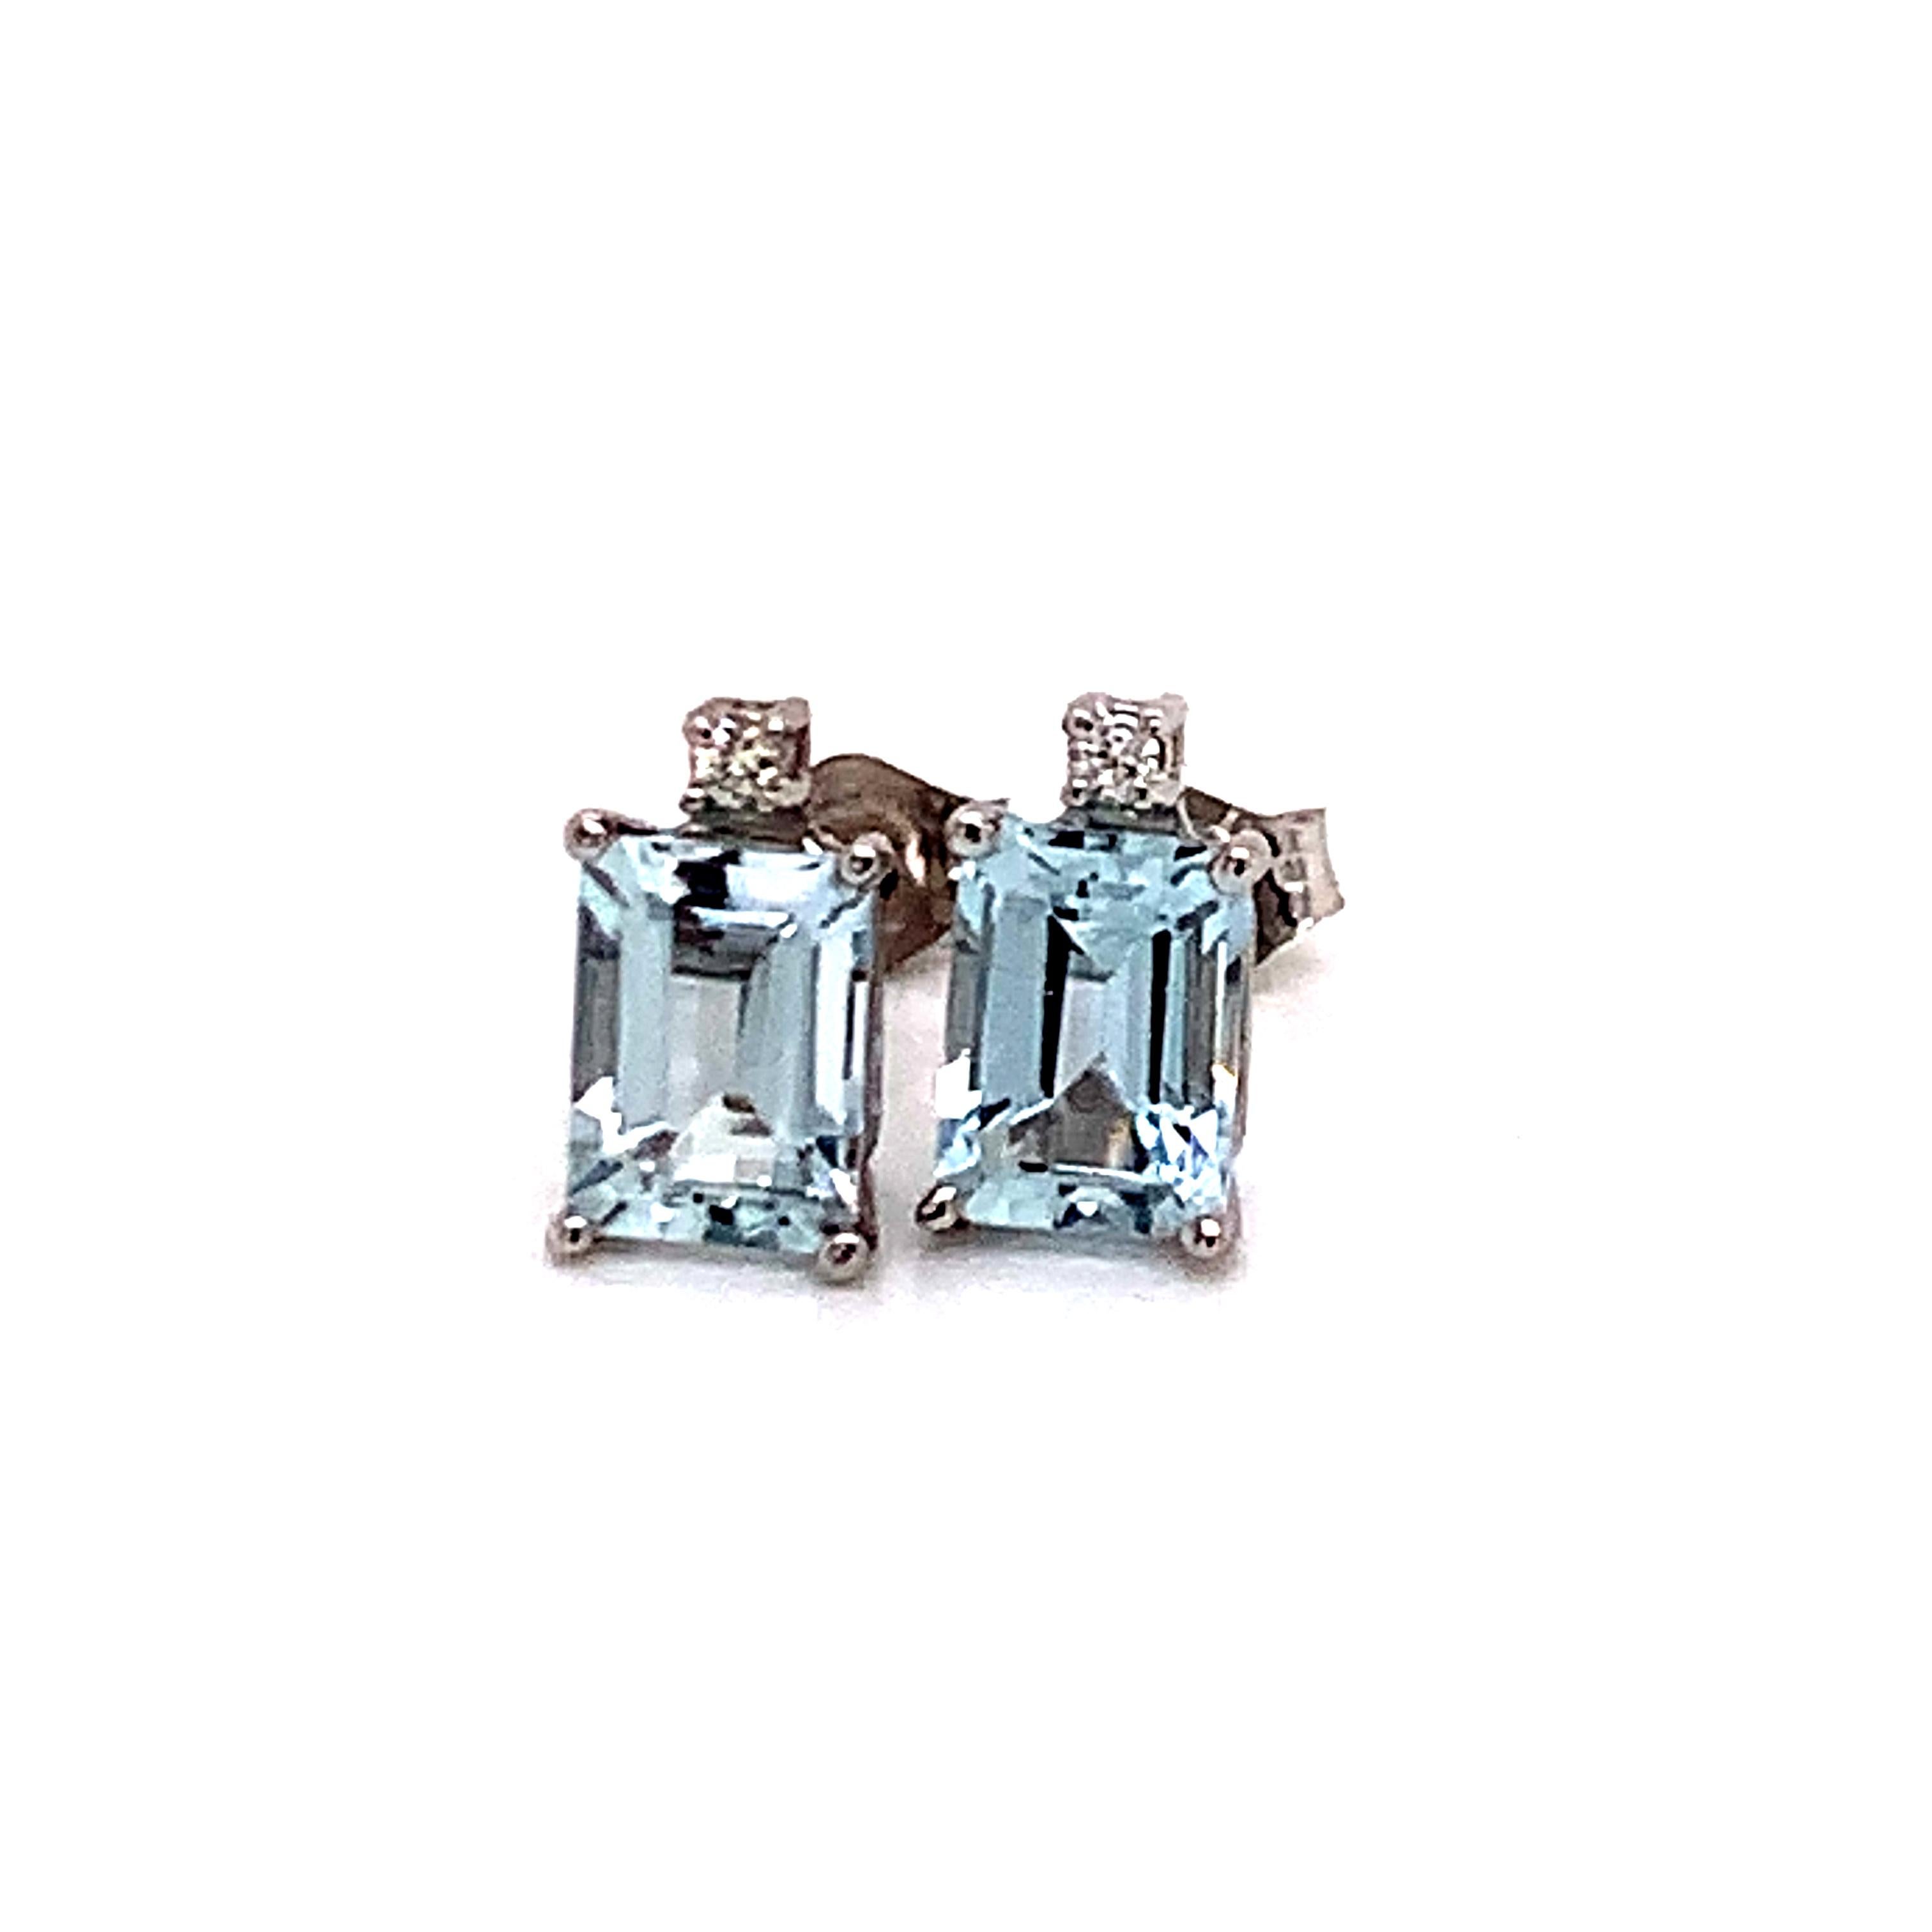 Natural Aquamarine Diamond Earrings 14k White Gold 1.84 TCW Certified For Sale 1